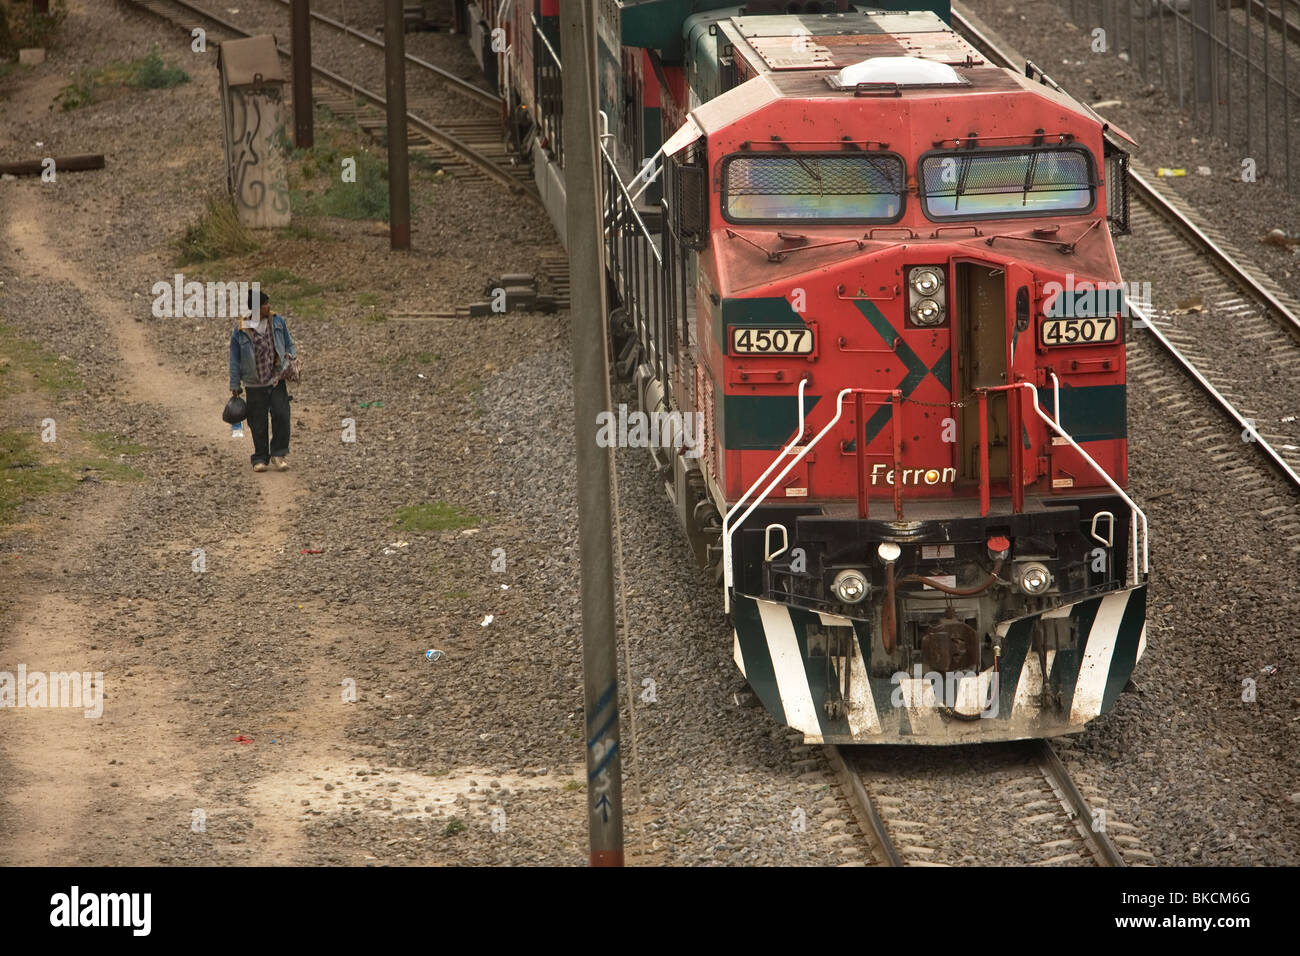 An undocumented Central American migrant traveling across Mexico to reach United States walks by a cargo train in Mexico City Stock Photo